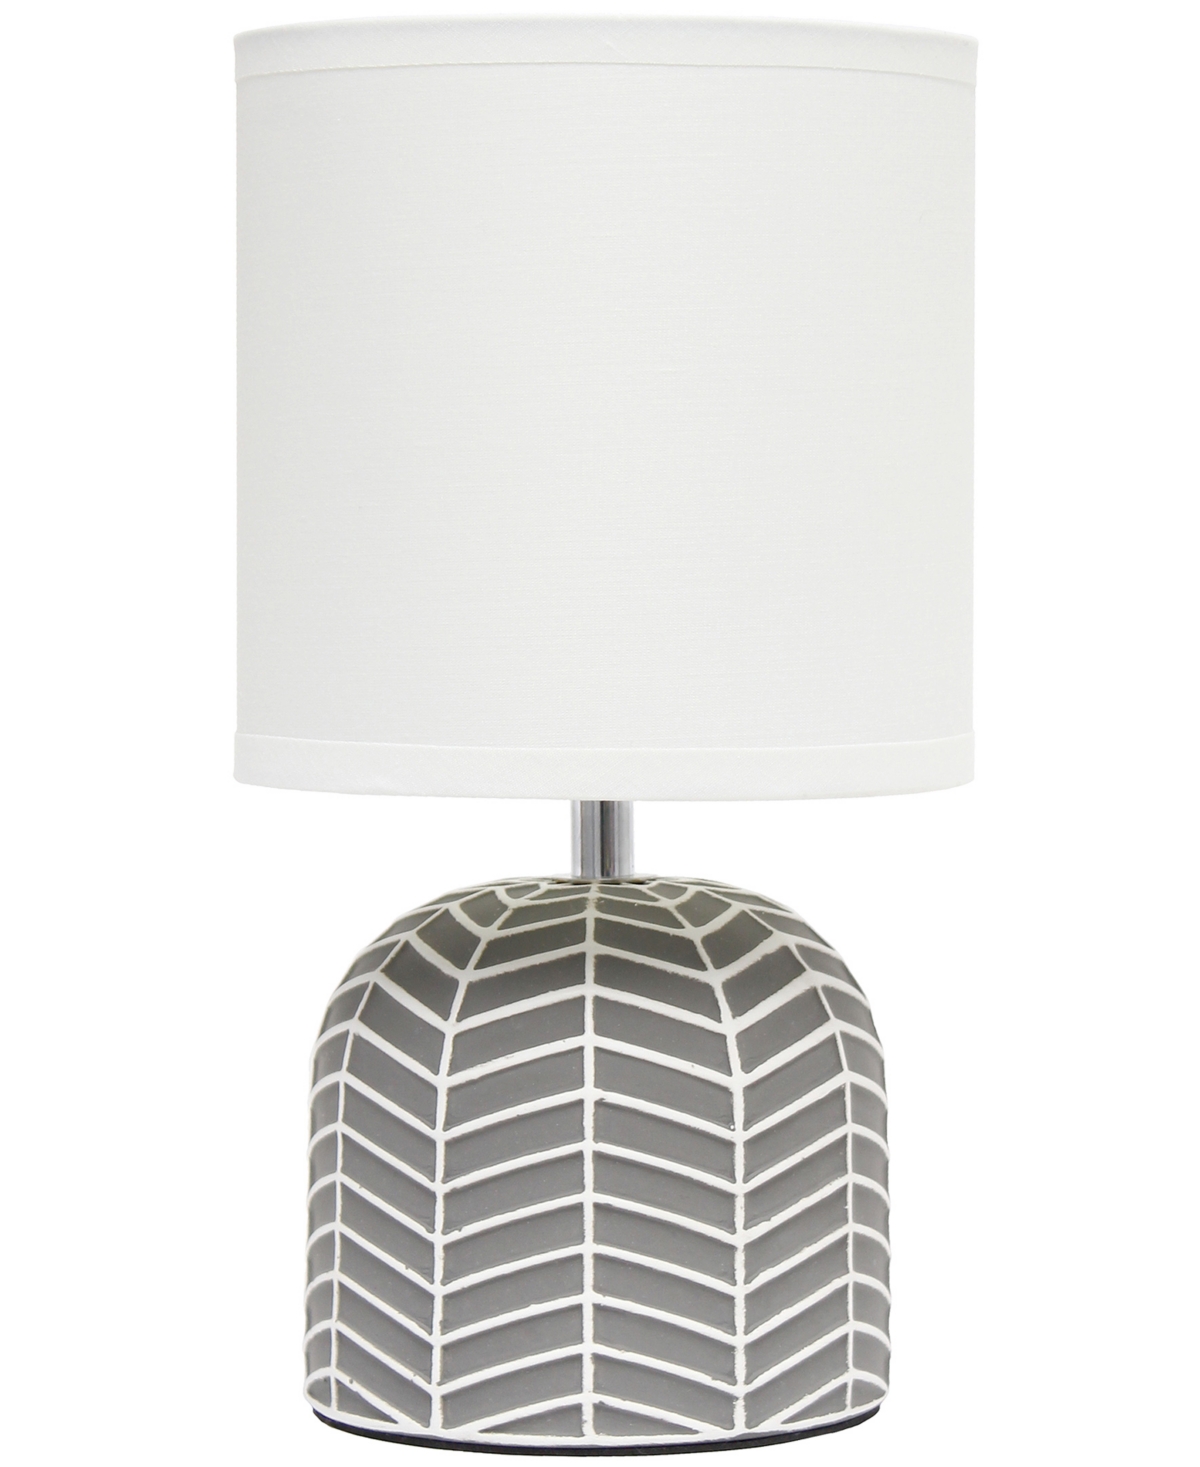 Shop Simple Designs 10.43" Petite Contemporary Webbed Waves Base Bedside Table Desk Lamp With White Fabric Drum Shade